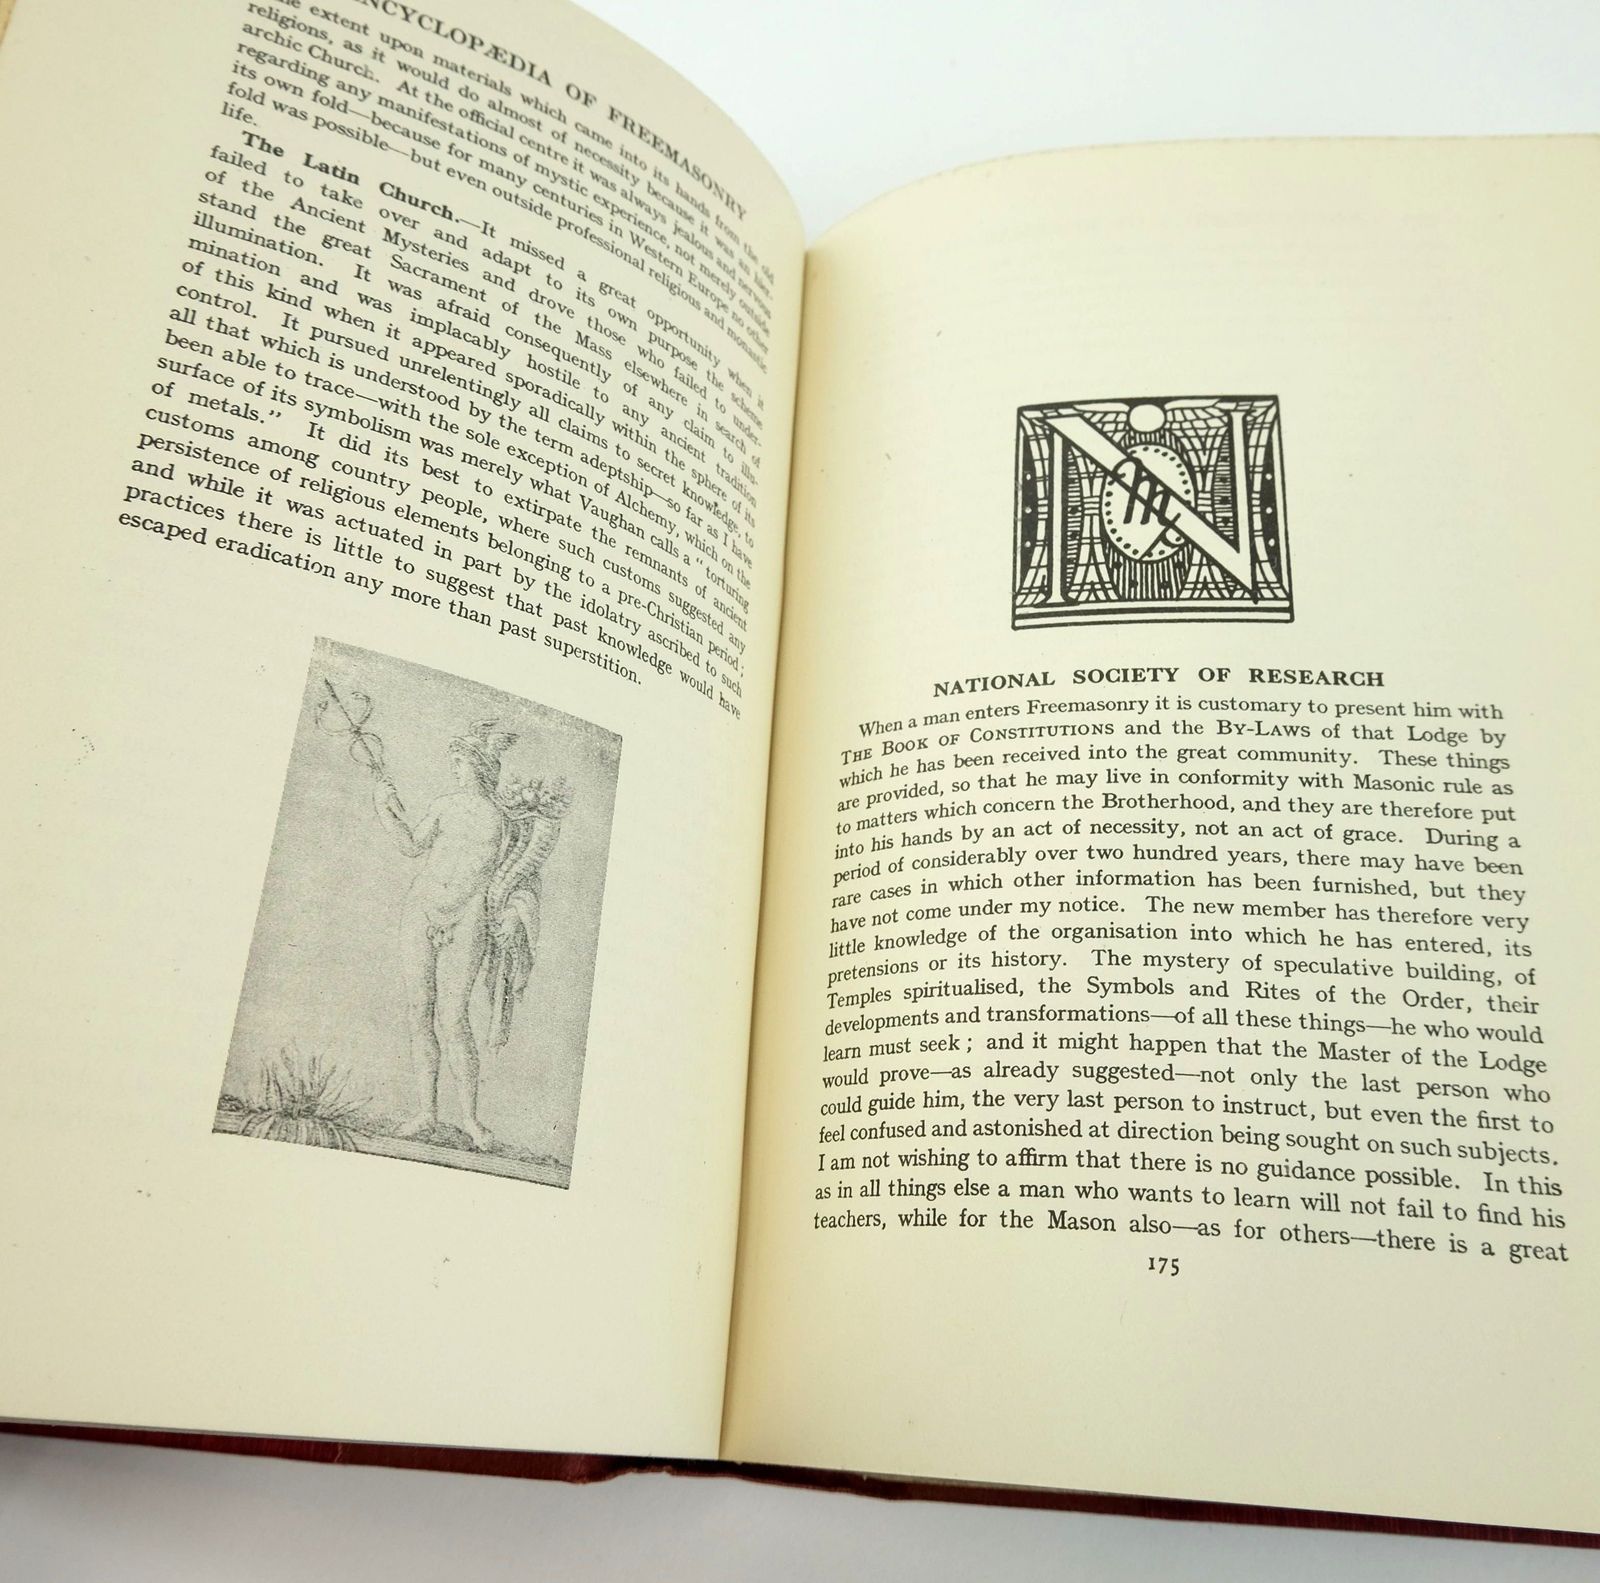 Photo of A NEW ENCYCLOPAEDIA OF FREEMASONRY (ARS MAGNA LATOMORUM) 2 VOLUMES written by Waiter, Arthur Edward published by Rider & Co. (STOCK CODE: 1820100)  for sale by Stella & Rose's Books